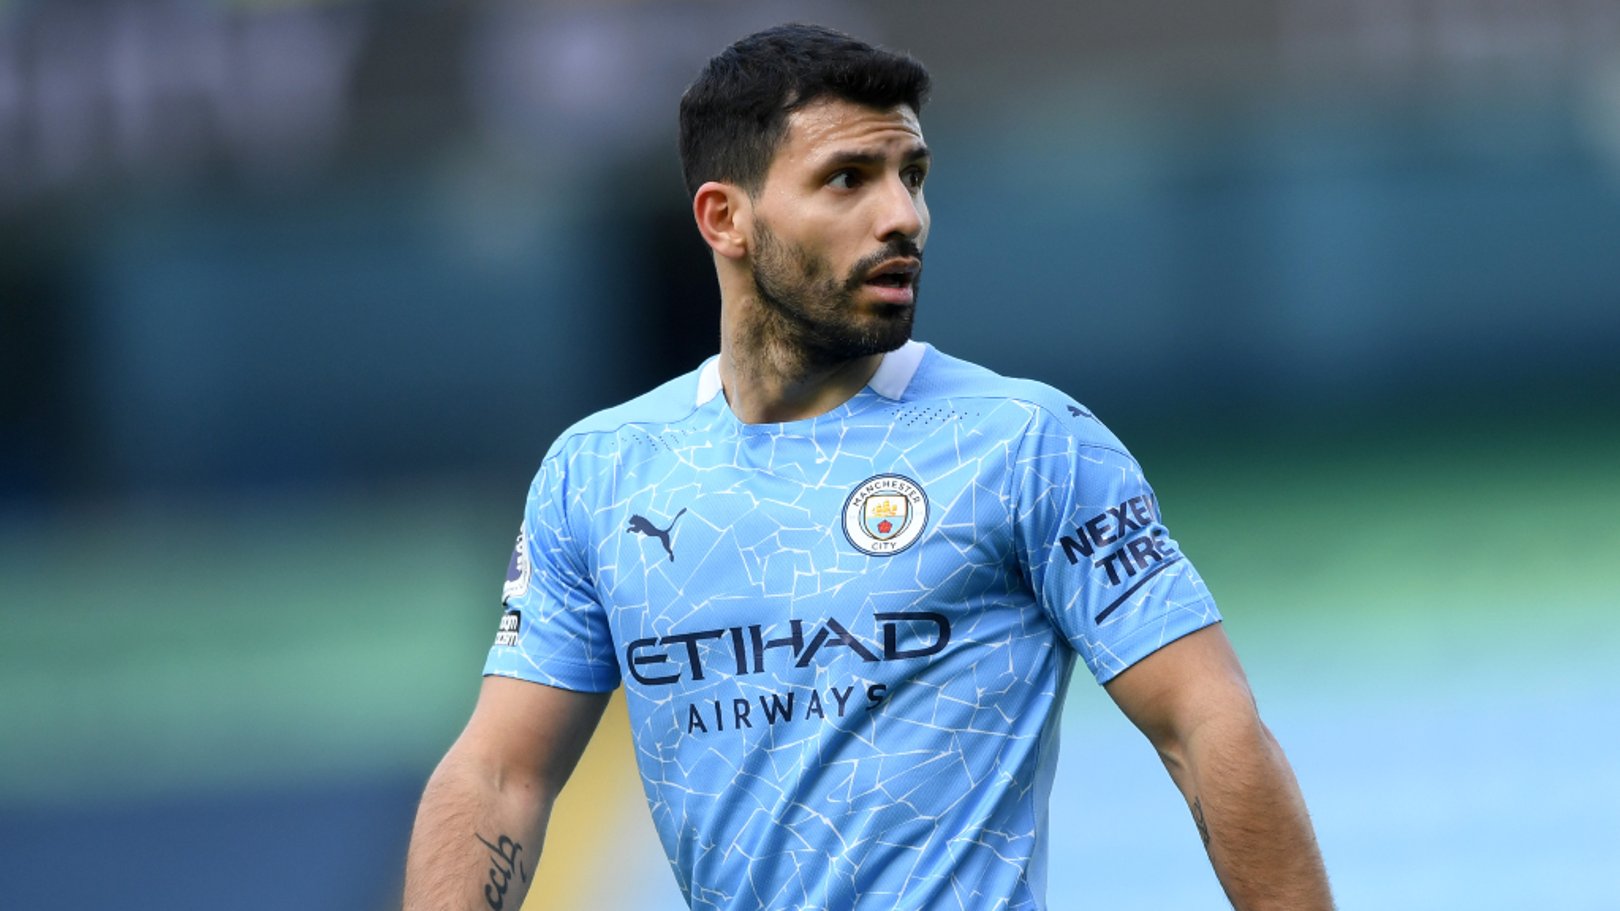 Guardiola: Aguero needs rhythm but his special quality will help us